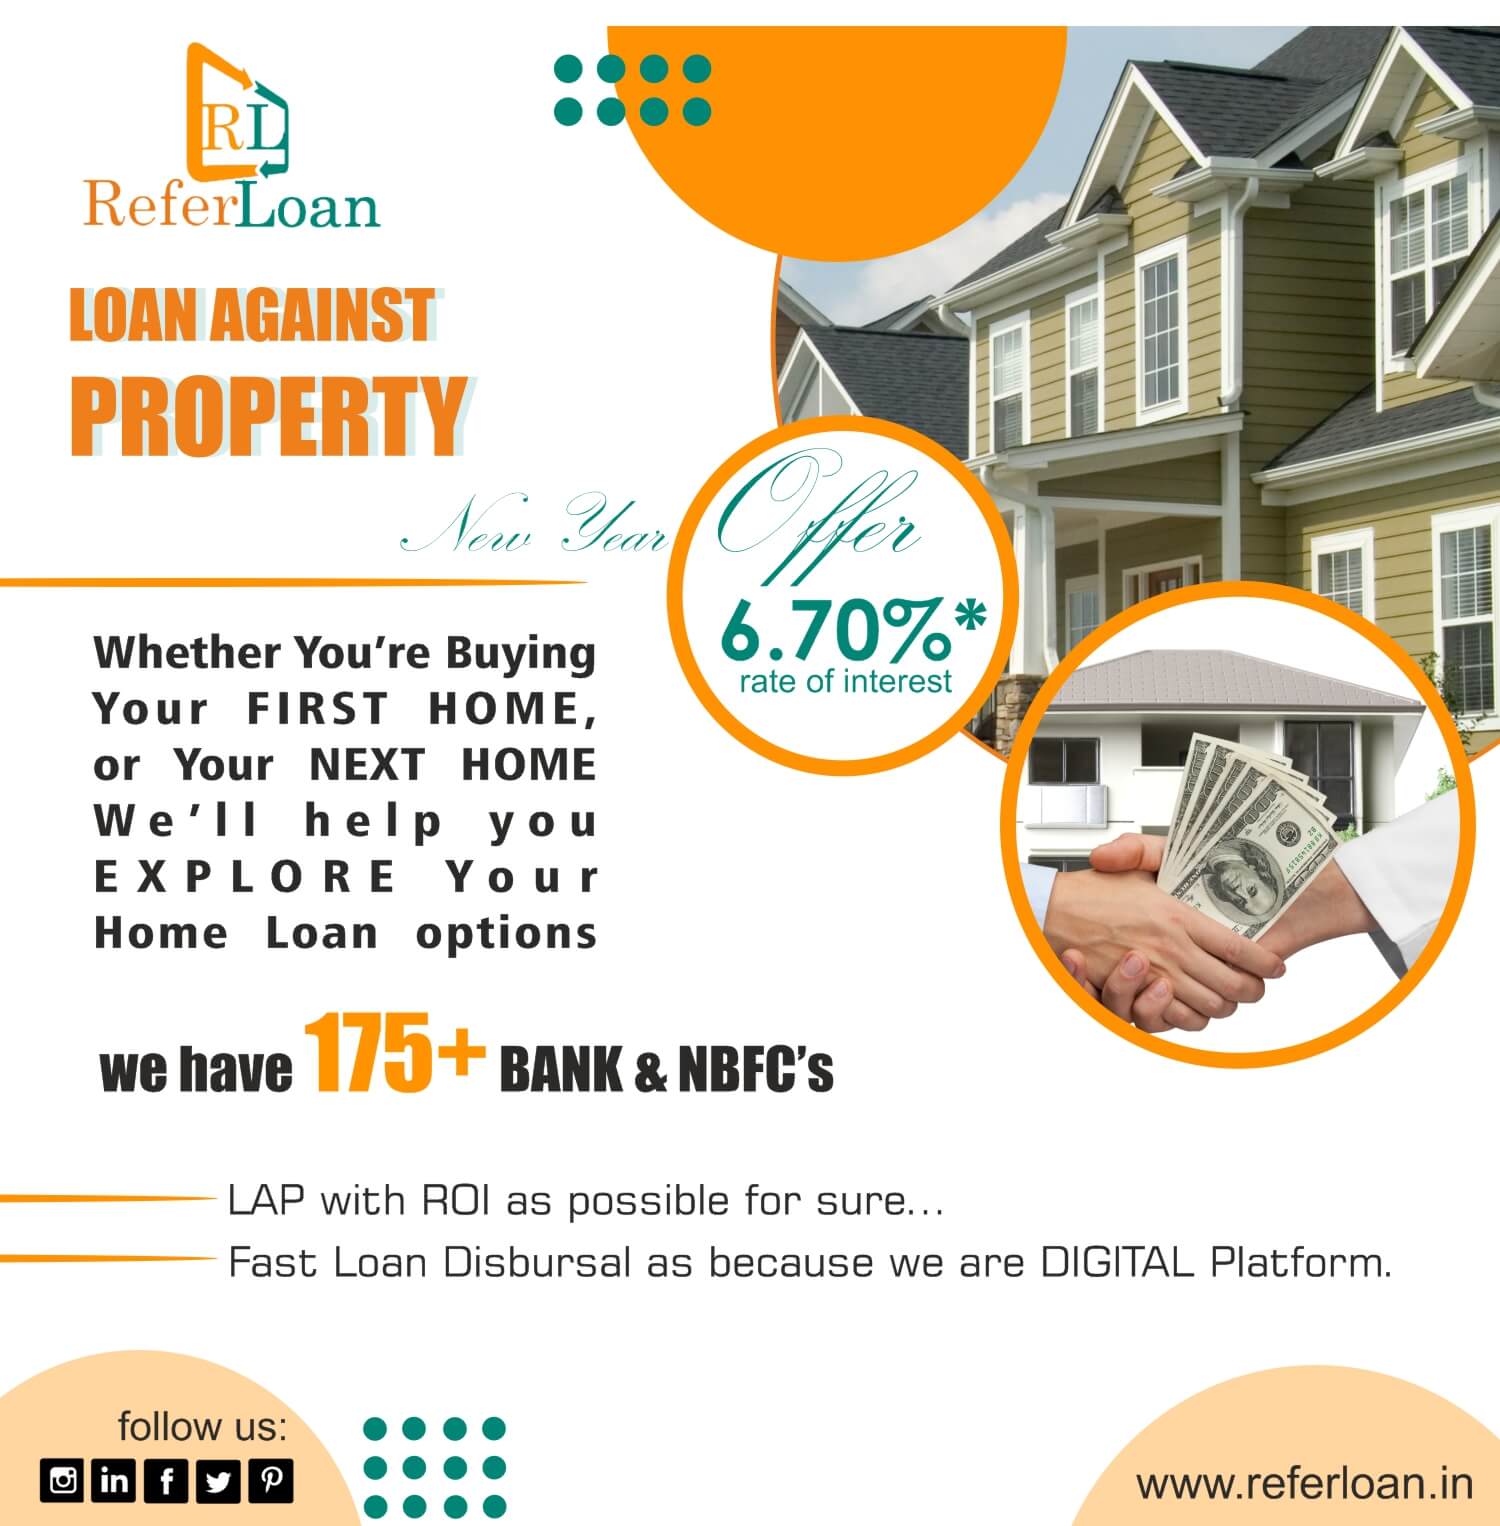 Referloan brings you LOAN AGAINST PROPERTY.ServicesBusiness OffersCentral DelhiOther